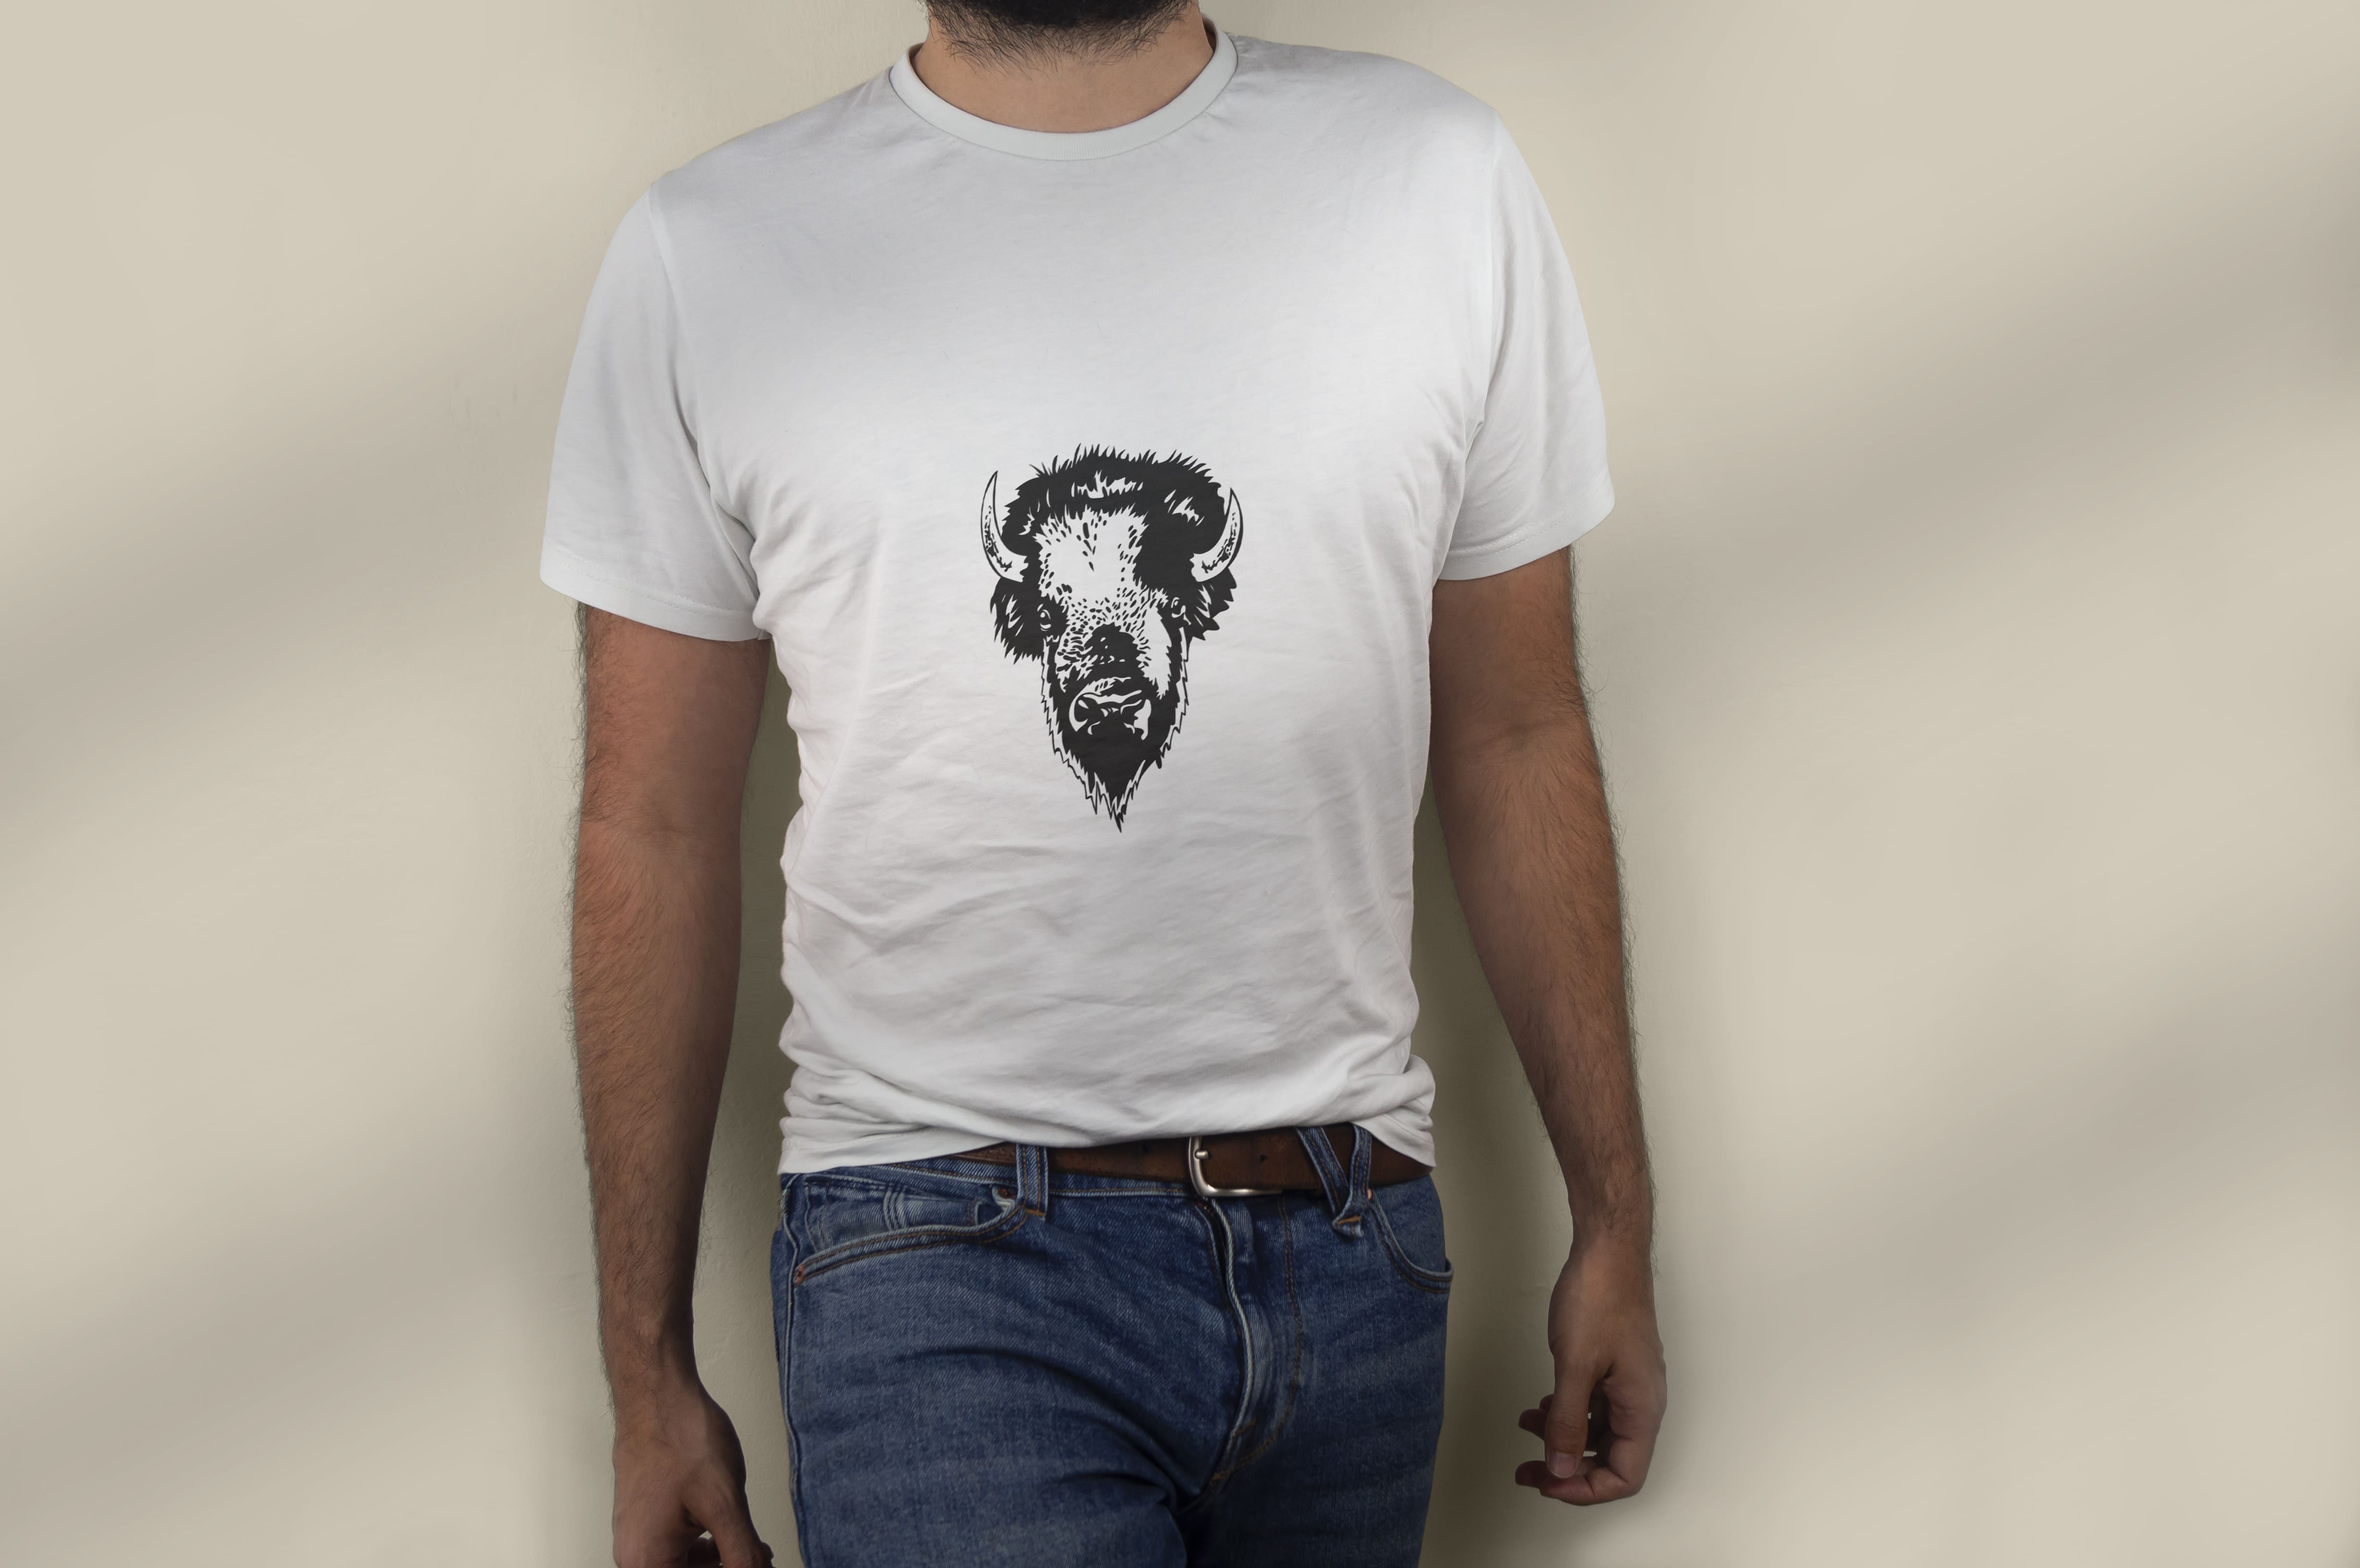 The bull is depicted on the T-shirt print.